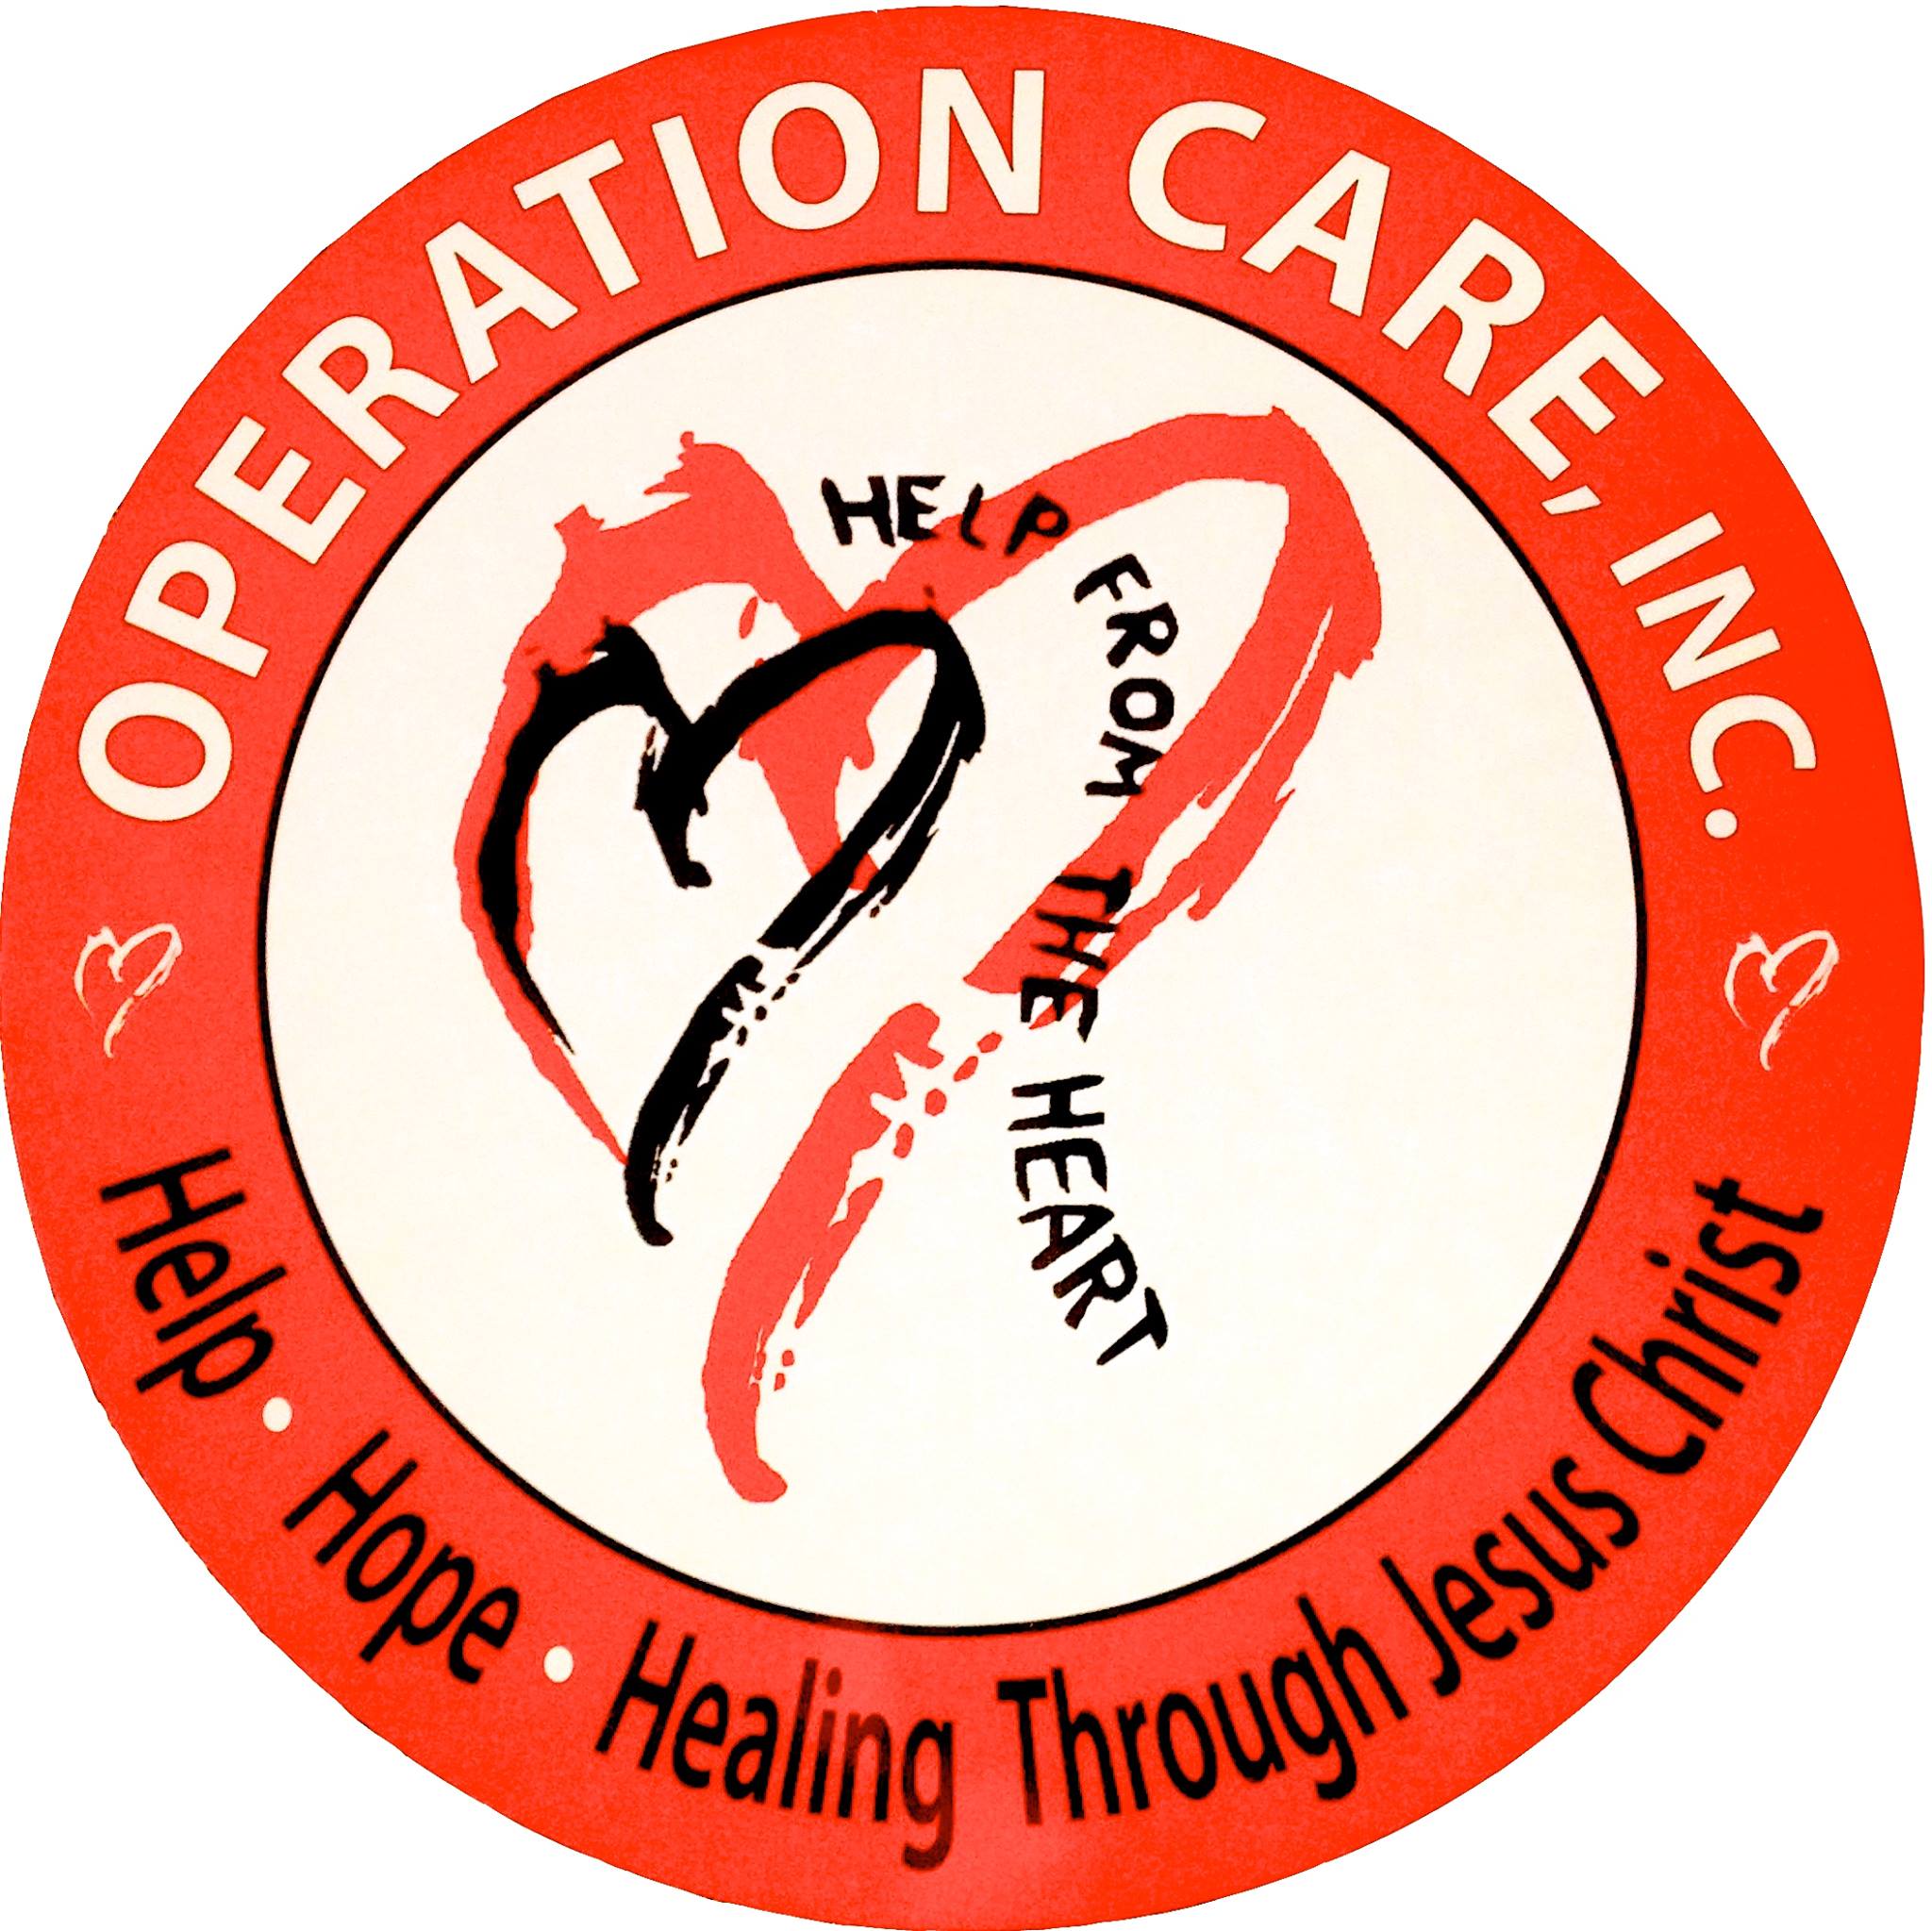 Operation Care - Transitional Housing